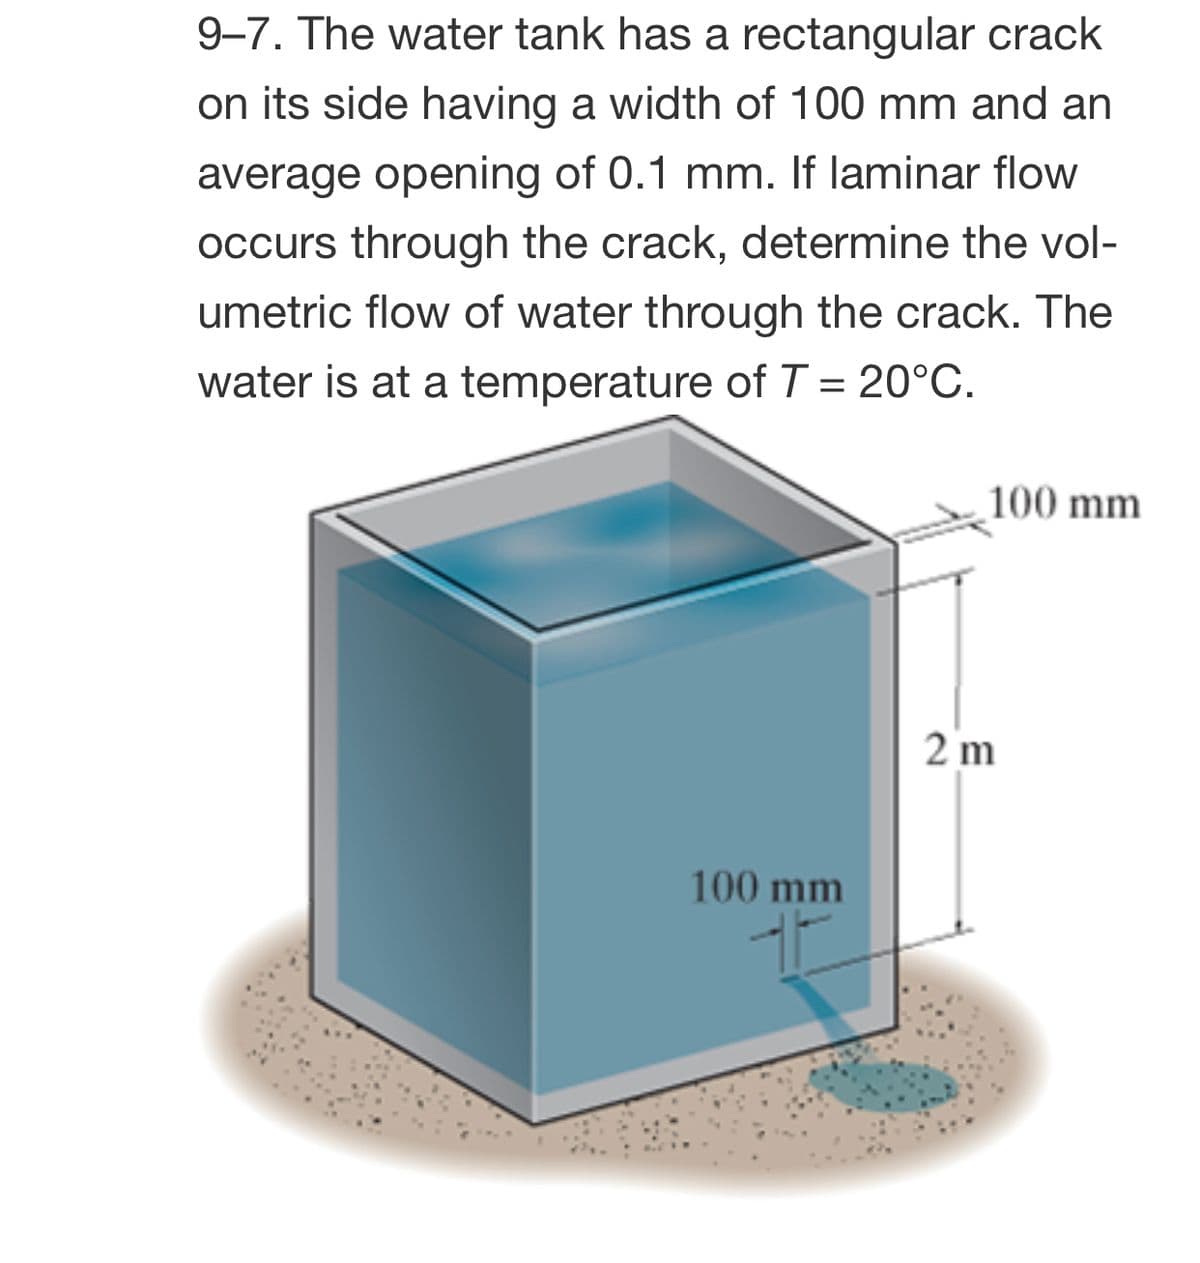 9-7. The water tank has a rectangular crack
on its side having a width of 100 mm and an
average opening of 0.1 mm. If laminar flow
occurs through the crack, determine the vol-
umetric flow of water through the crack. The
water is at a temperature ofT = 20°C.
100 mm
2 m
100 mm
